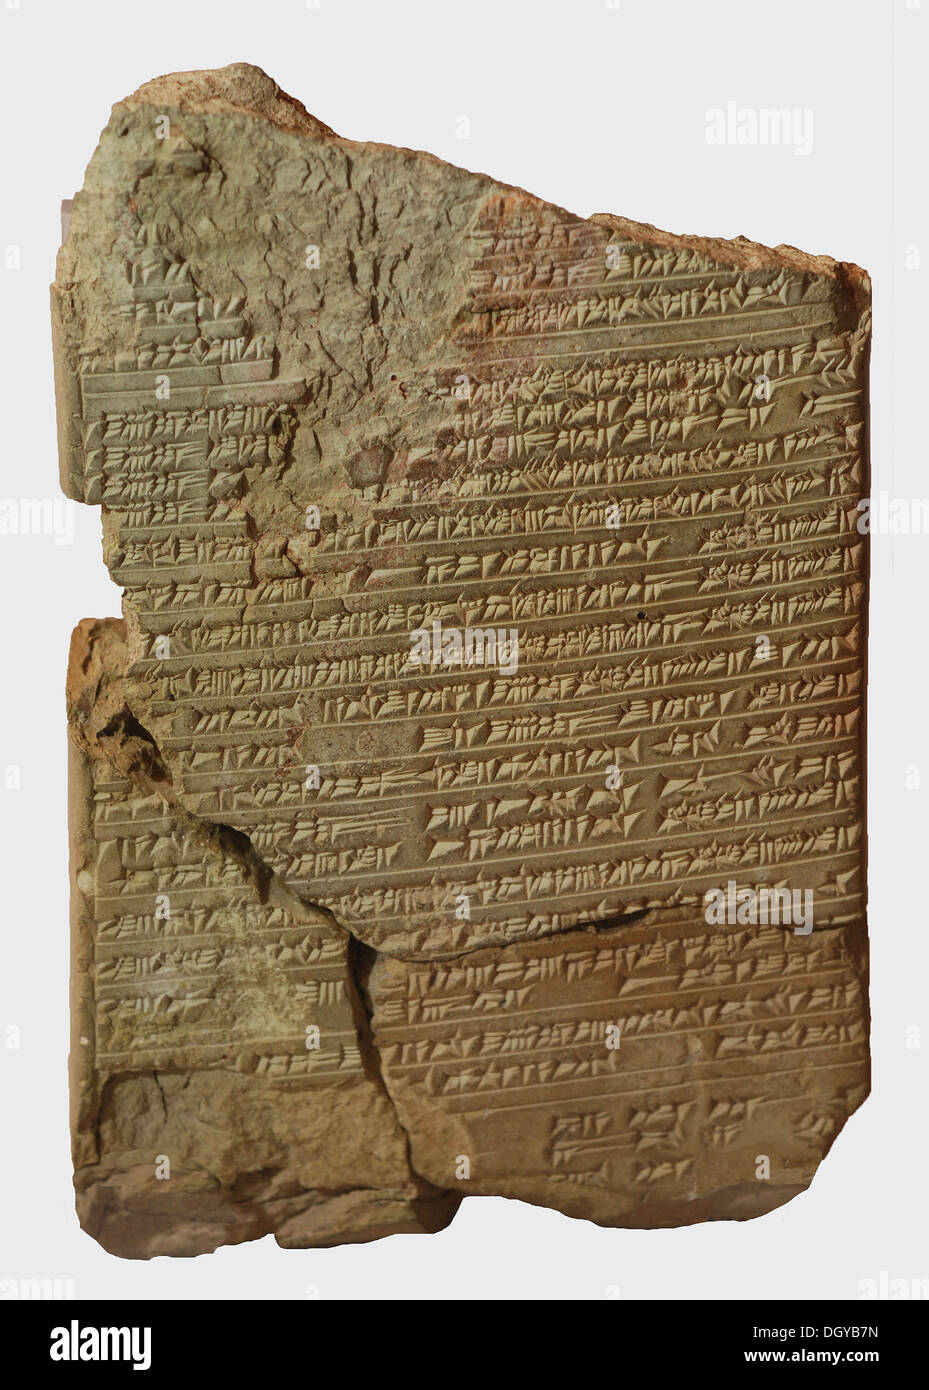 5601. Quniform medical tablet from Ninveh dating c. 650 BC. The text contains ointments and treatments mostly for sick infants. Stock Photo